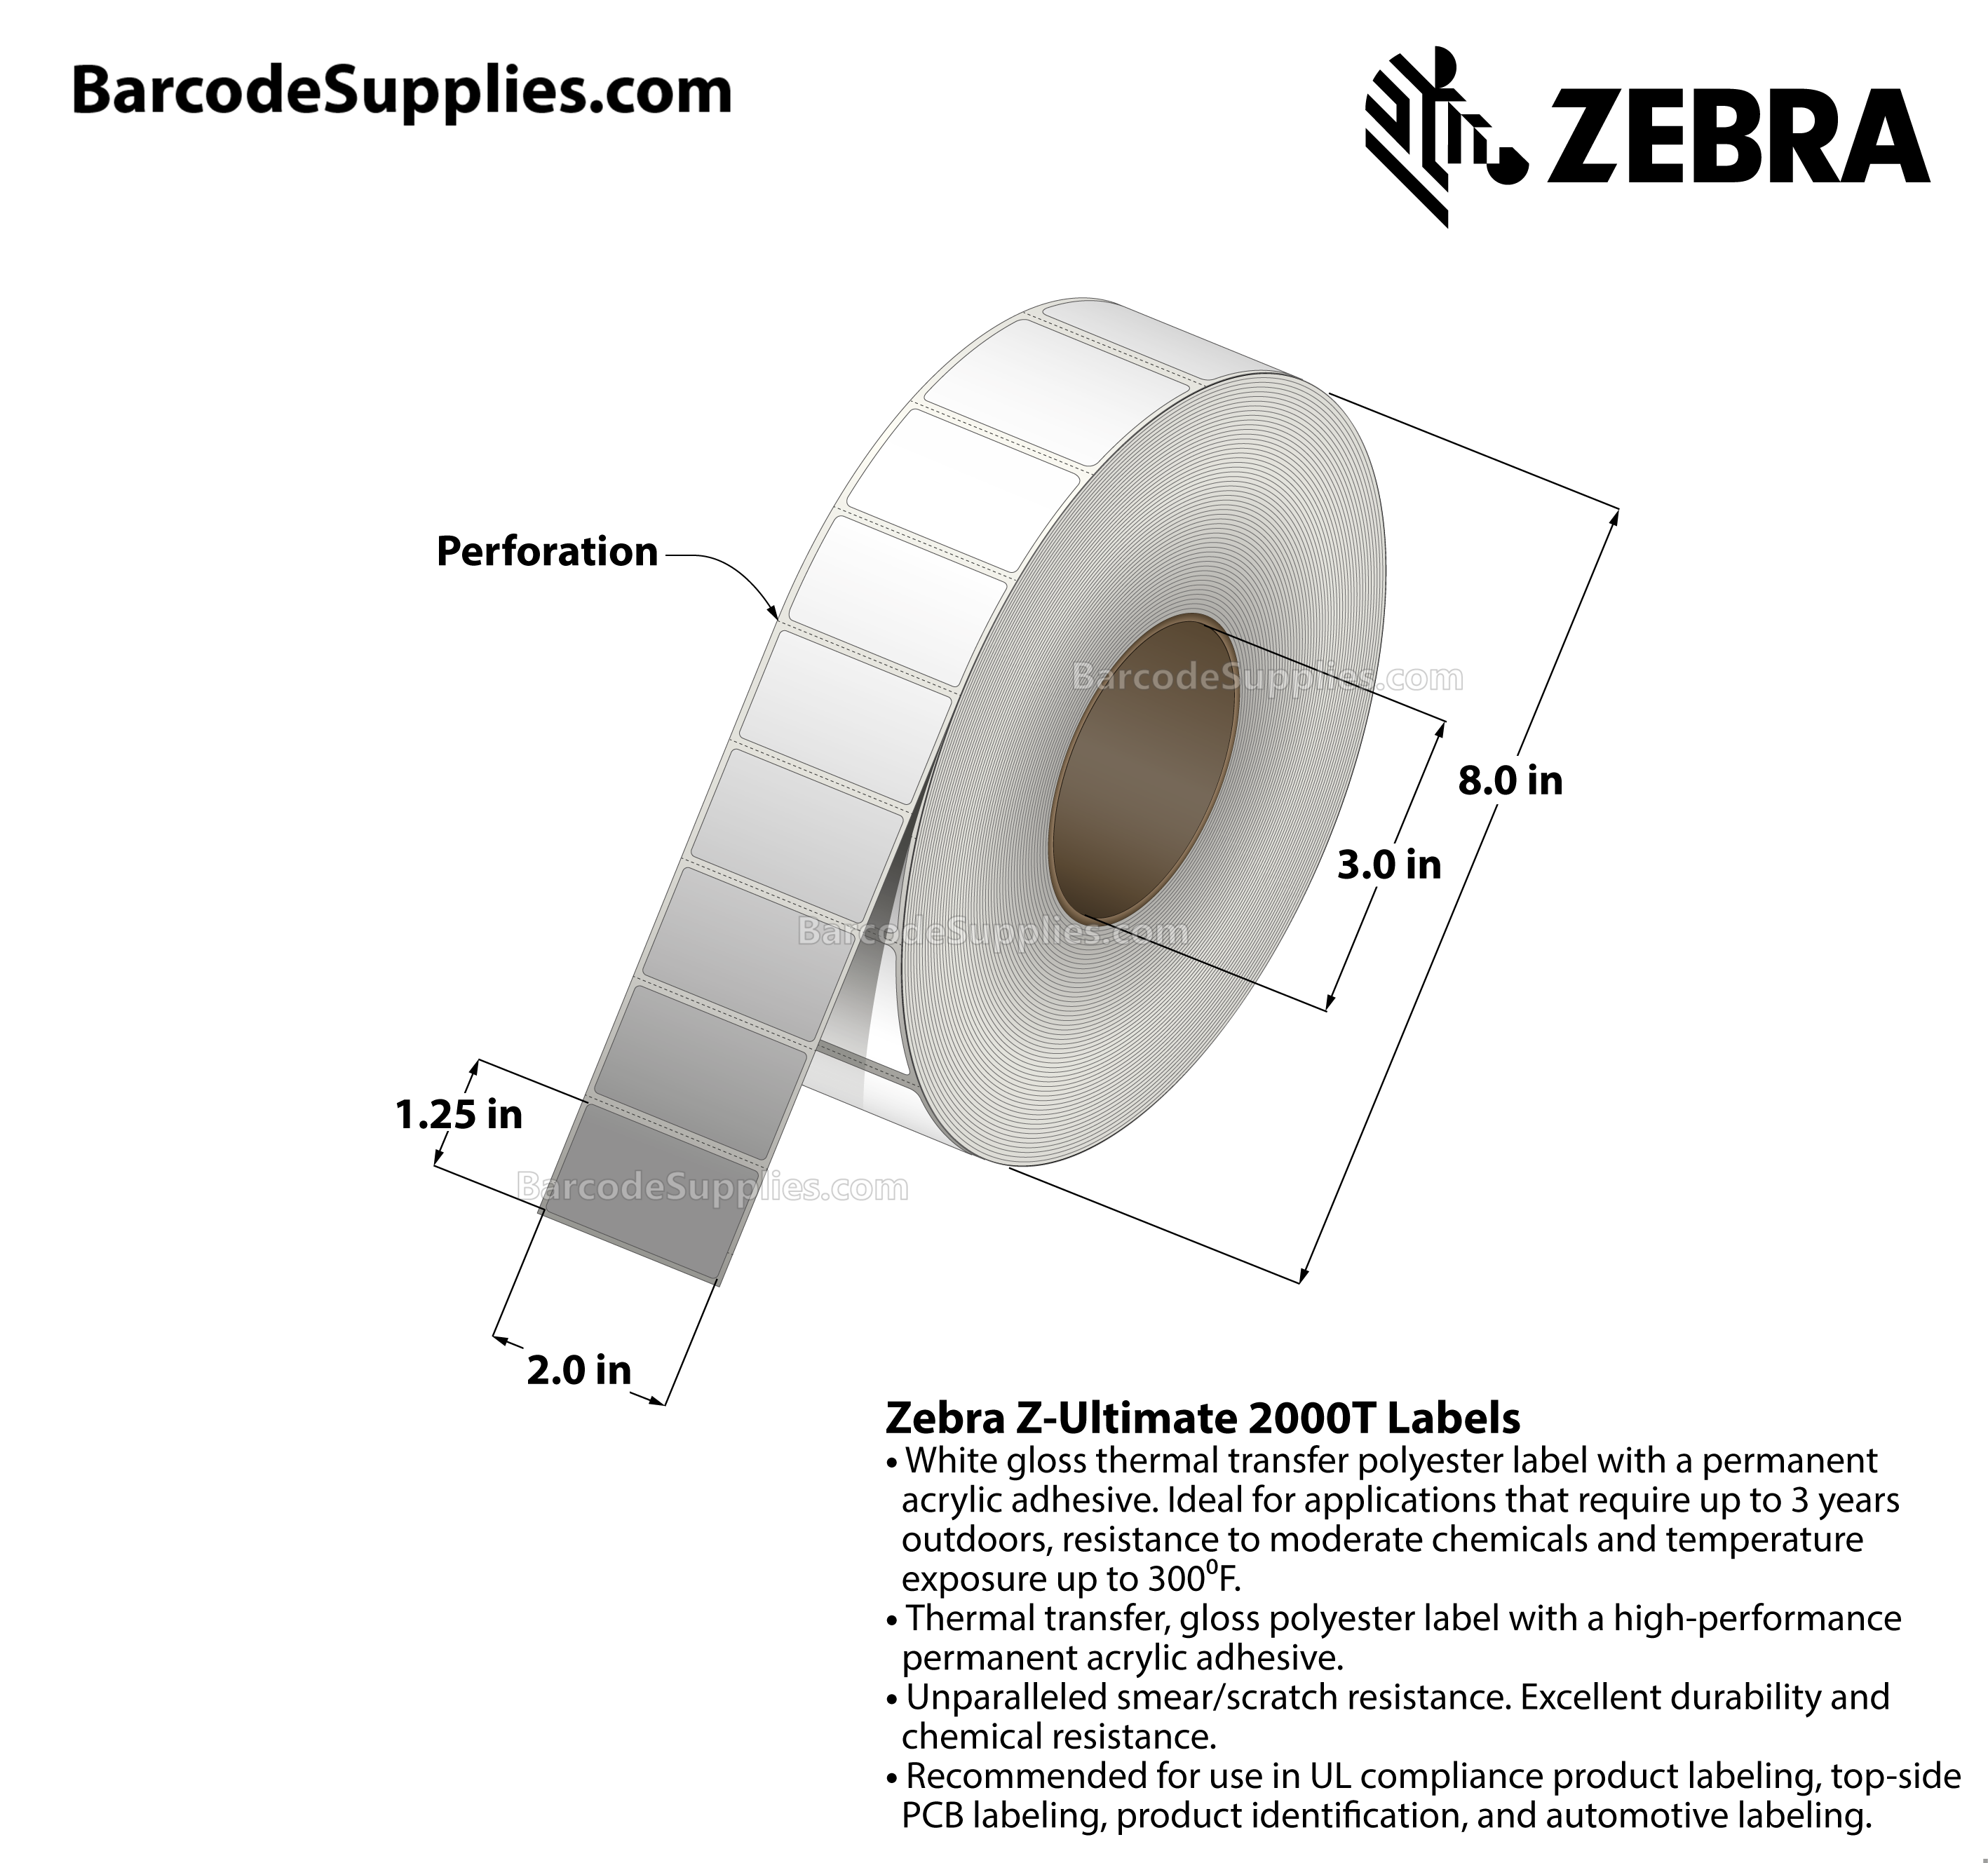 2 x 1.25 Thermal Transfer White Z-Ultimate 2000T Labels With Permanent Adhesive - Perforated - 2500 Labels Per Roll - Carton Of 1 Rolls - 2500 Labels Total - MPN: 10022960